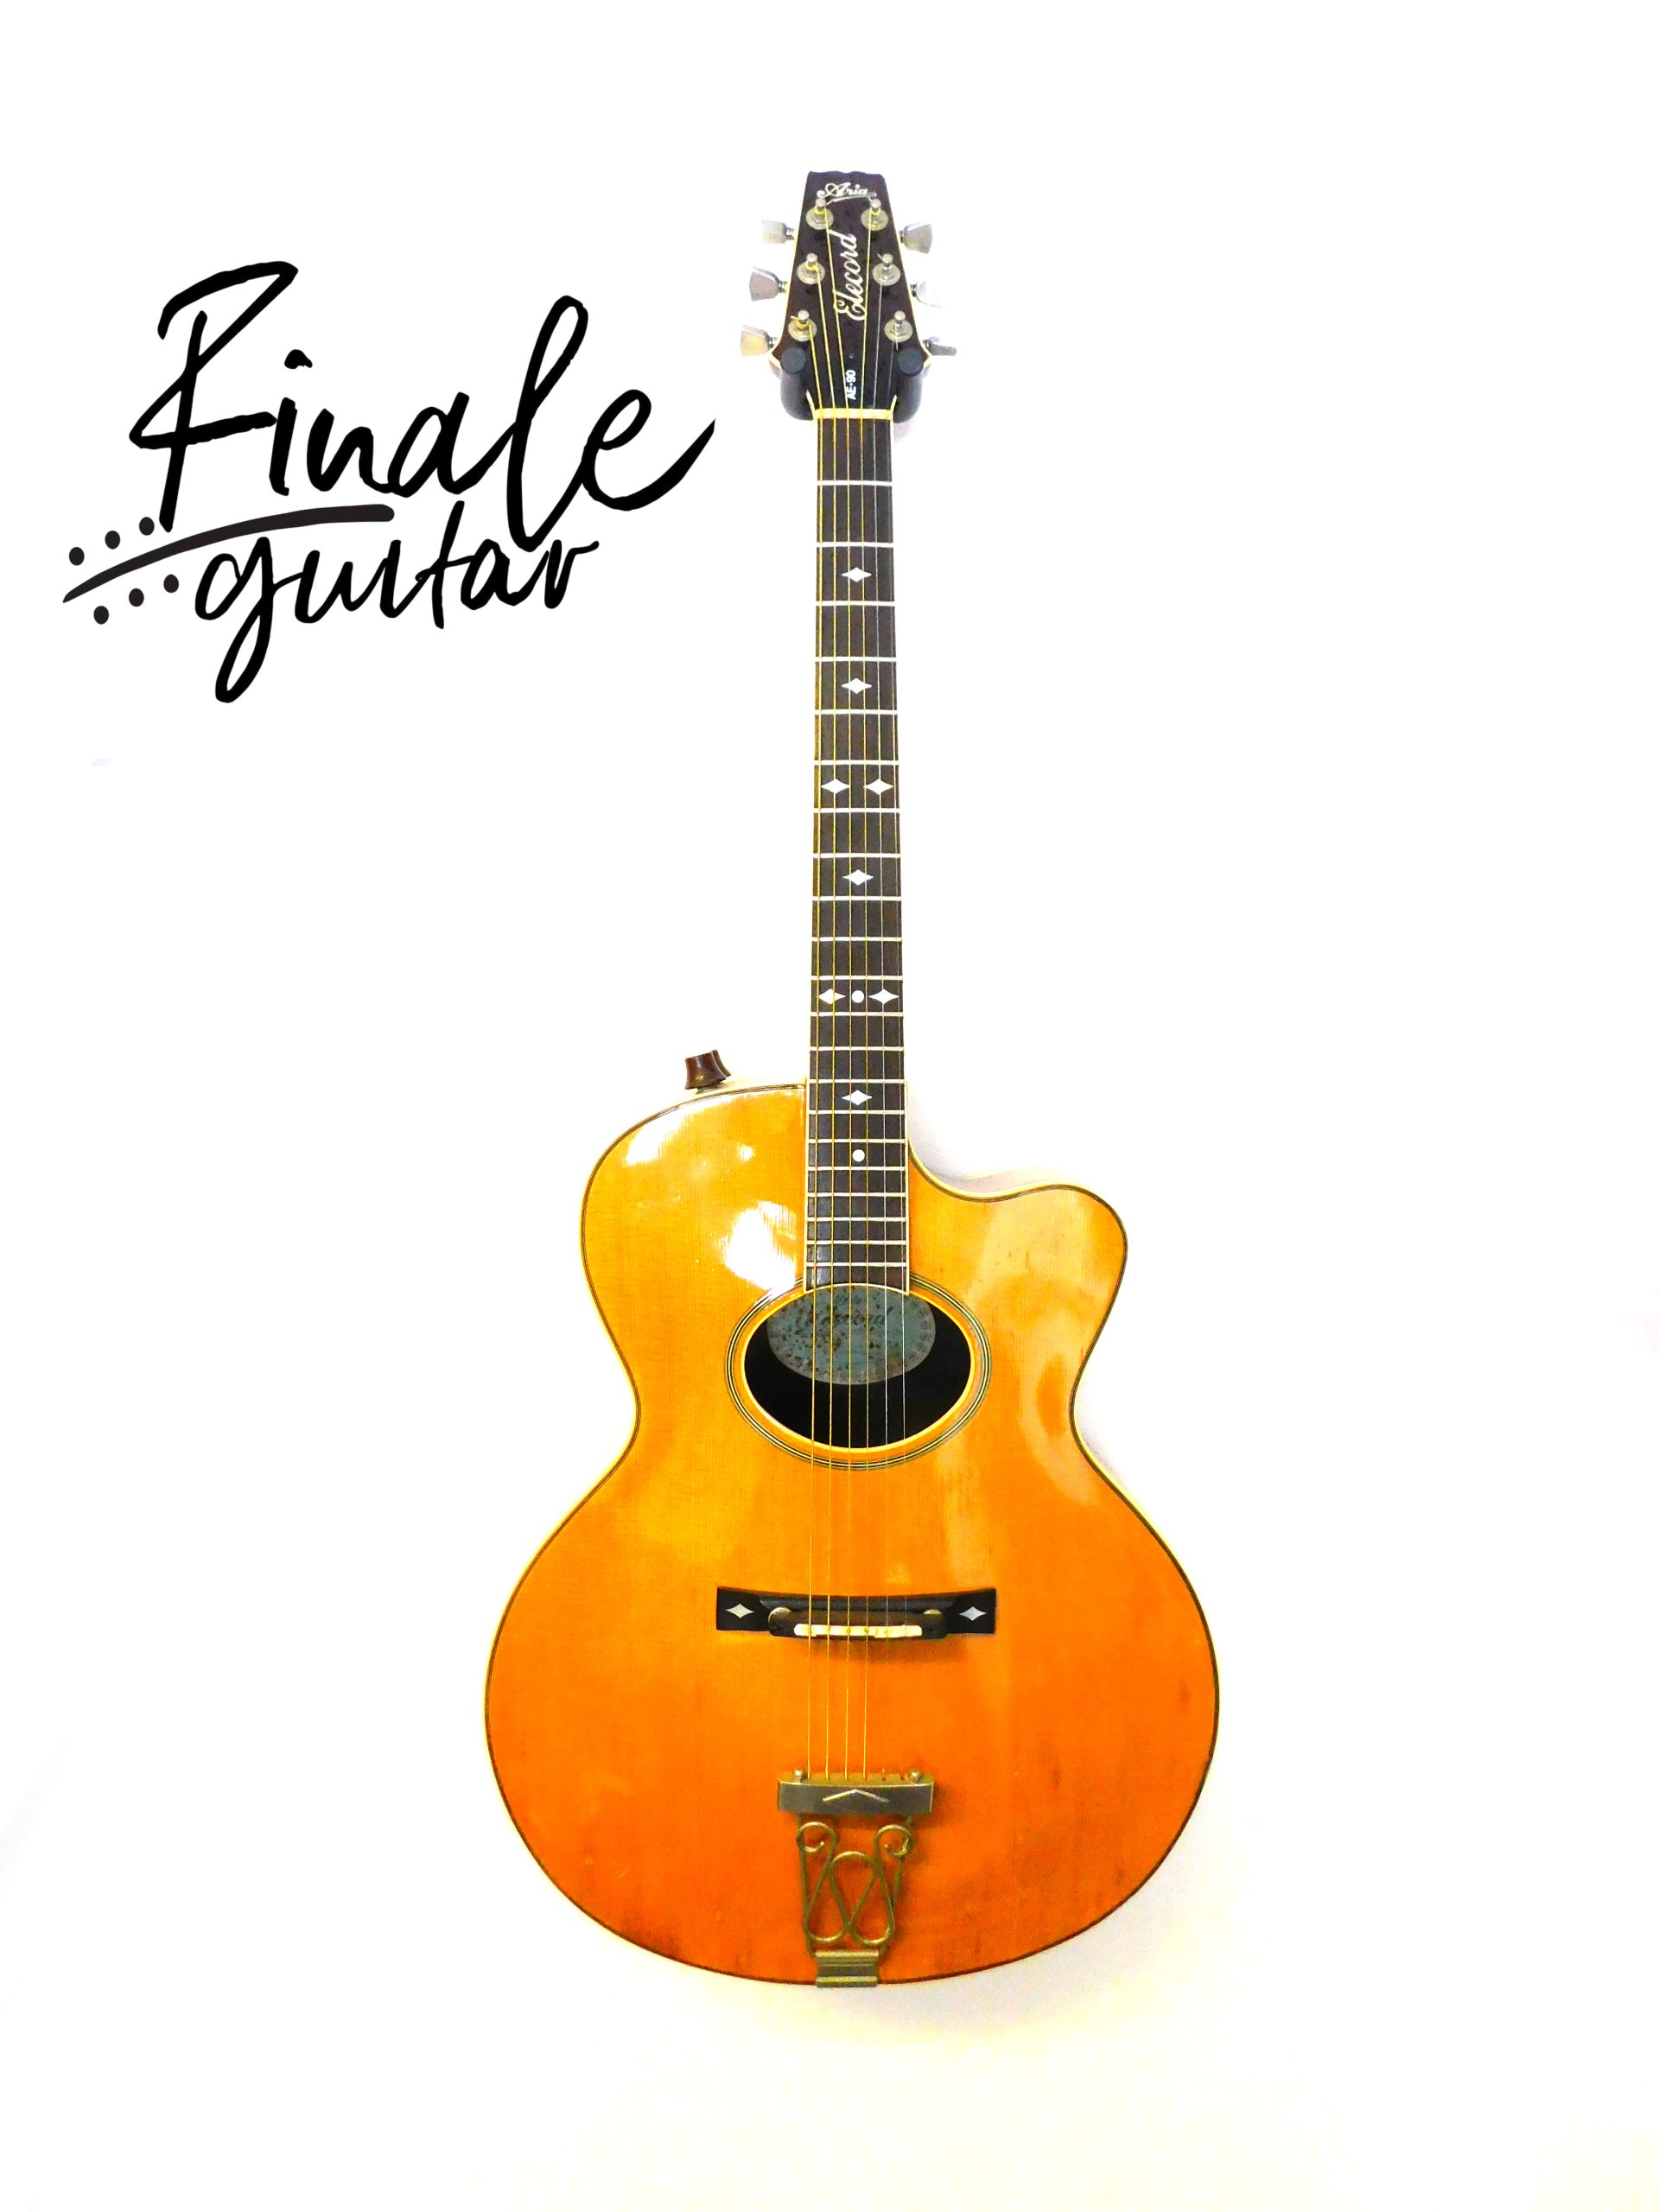 Aria Elecord AE90 MIJ 1981 for sale in our Sheffield guitar shop, Finale Guitar